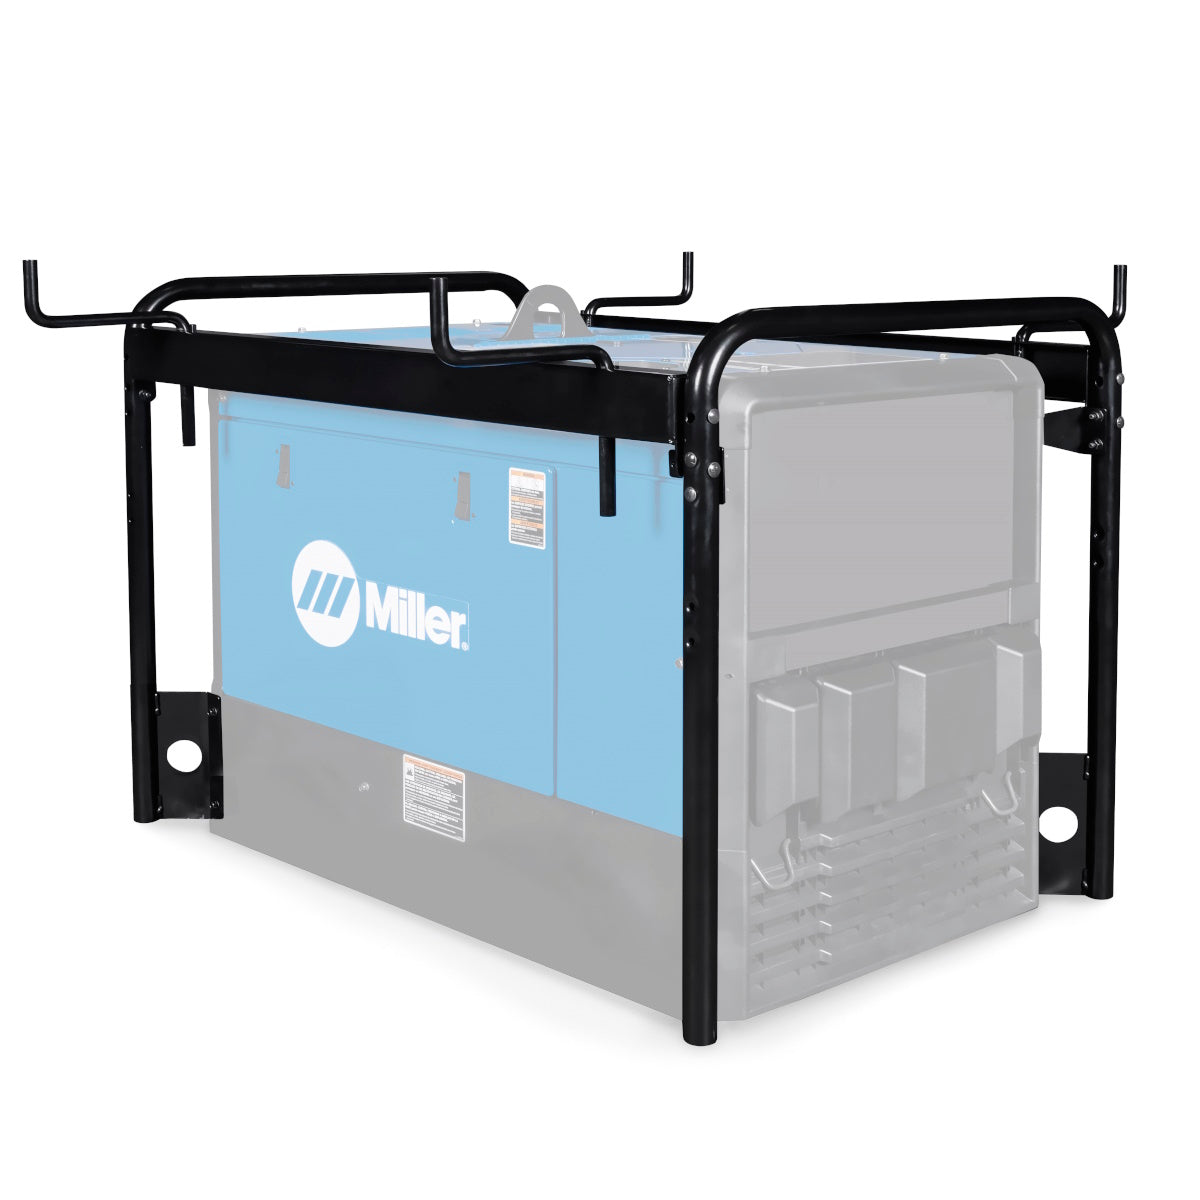 Miller Protective Cage with Cable Holders (301709)